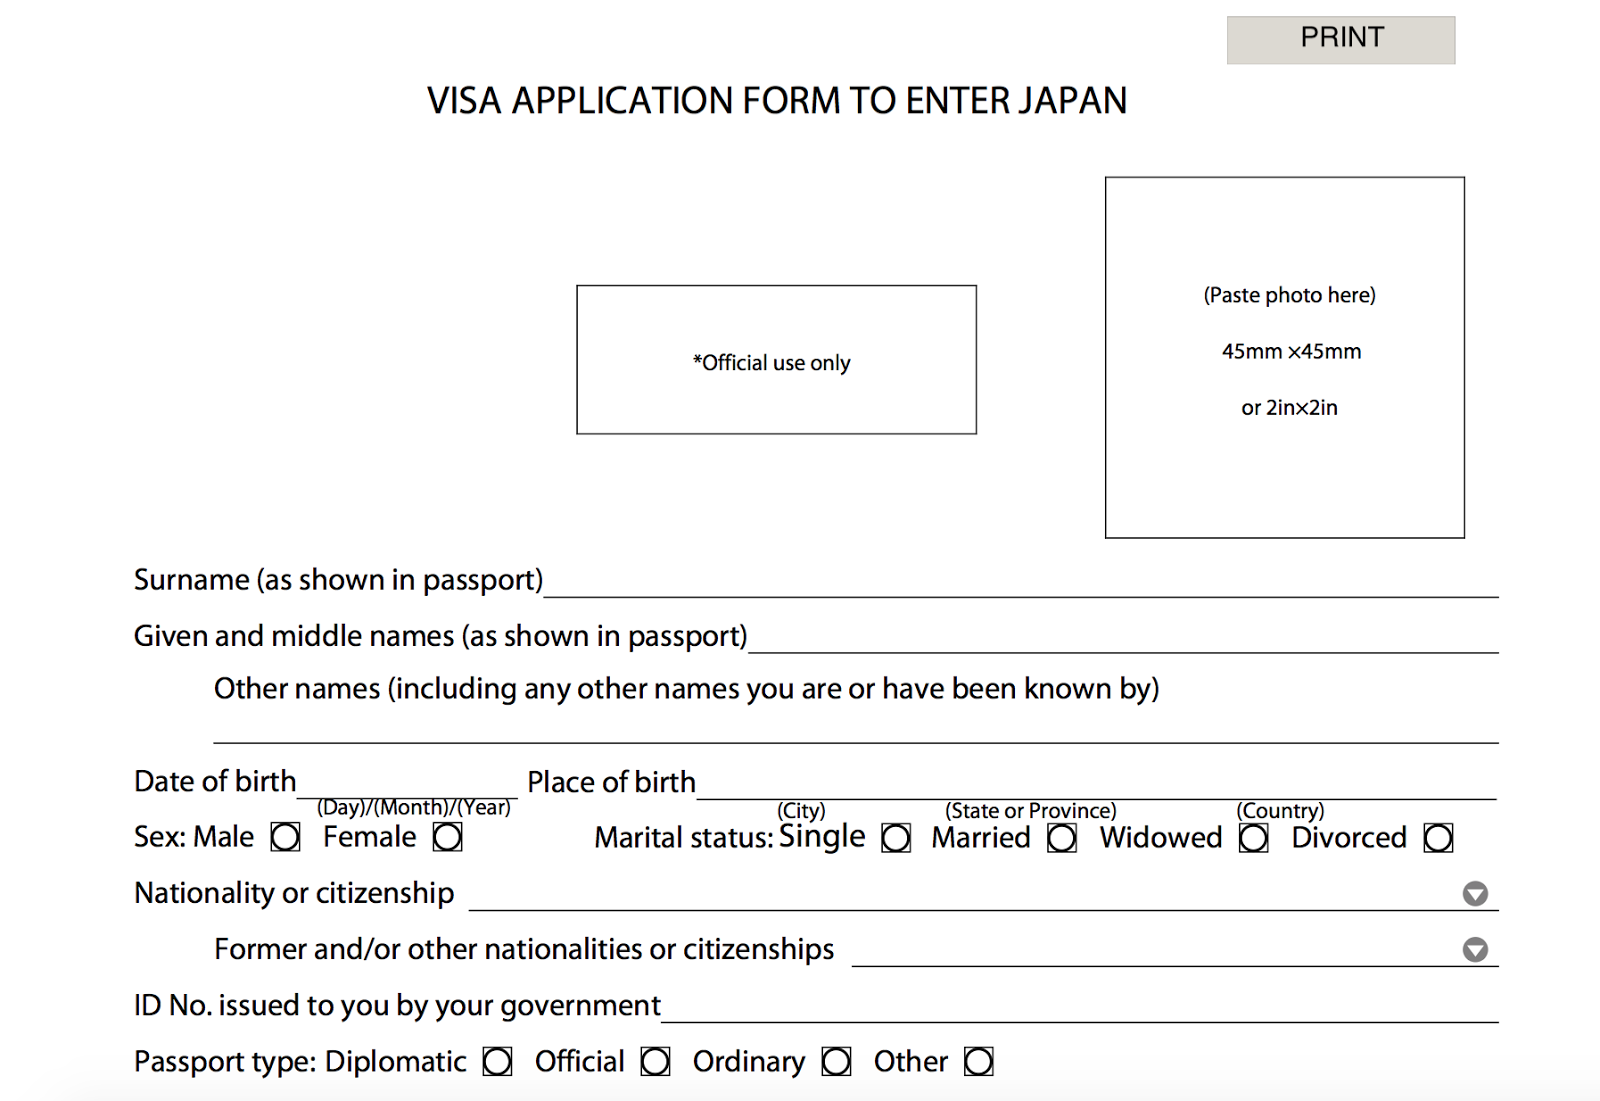 How To Apply For A Japan Tourist Visa Without Itr And Get Approved For A Multiple Entry Visa 2018 Guide The Jerny Travel And Inspirations